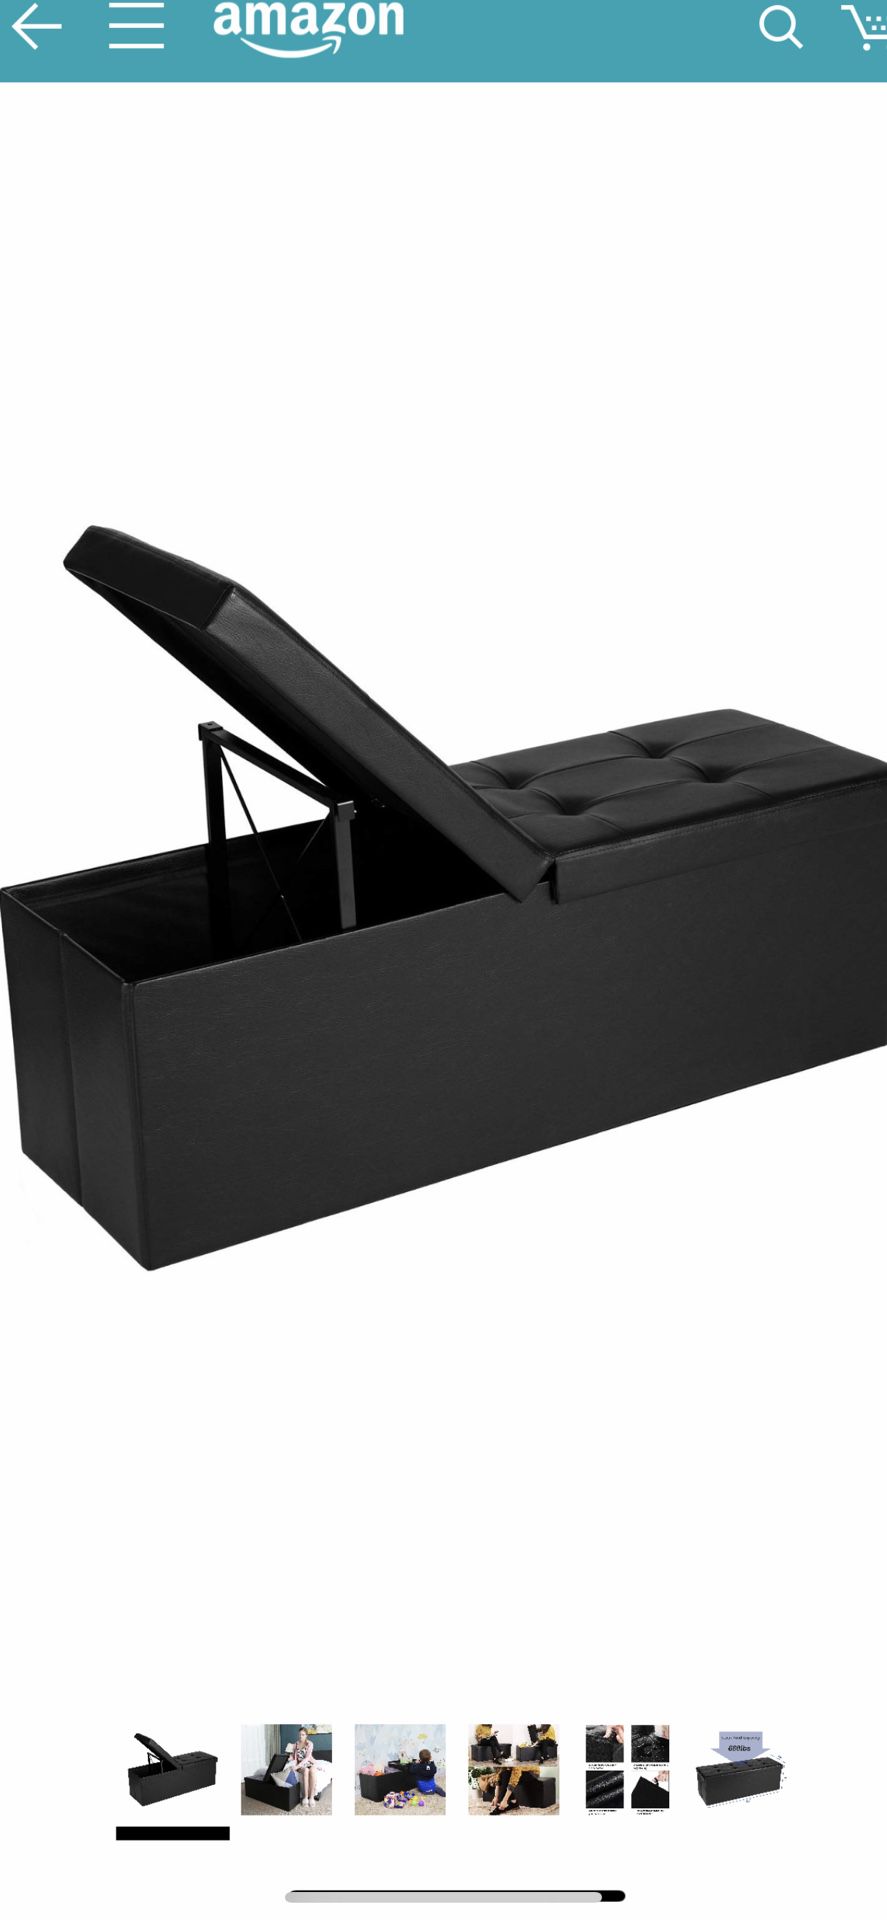 43 Inches Folding Storage Ottoman Bench, with Flipping Lid, Storage Chest, Padded Seat Footrest, with Iron Frame Support, Black